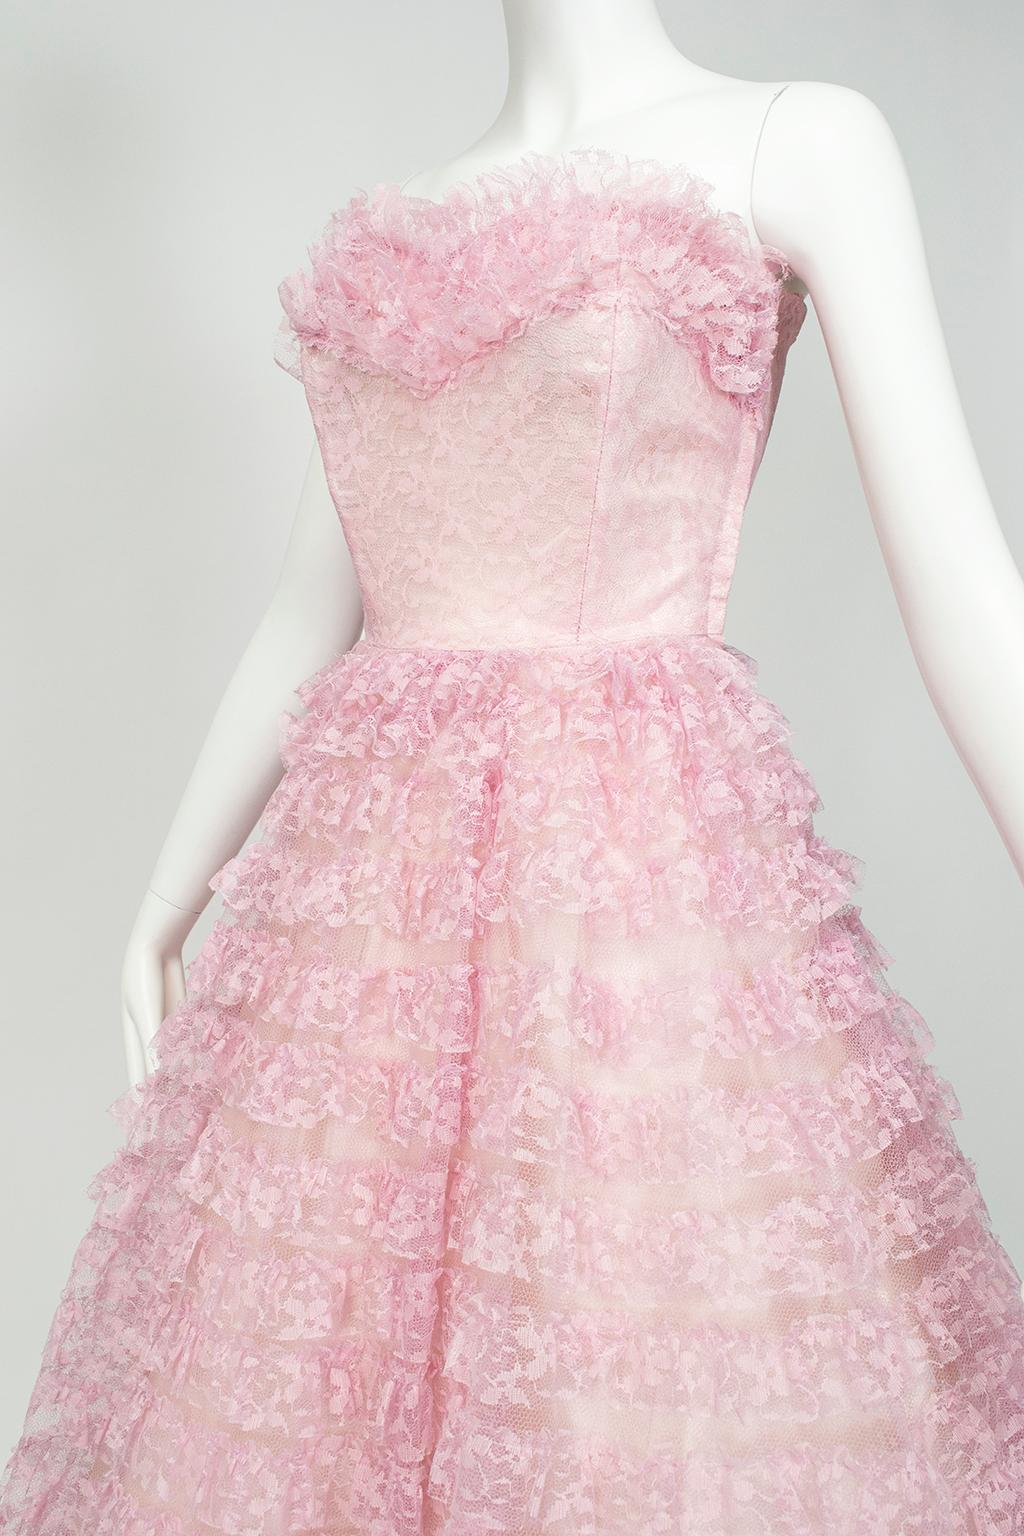 Pink-Lavender New Look Strapless Tiered Lace Ballerina Party Dress – S-M, 1950s For Sale 1